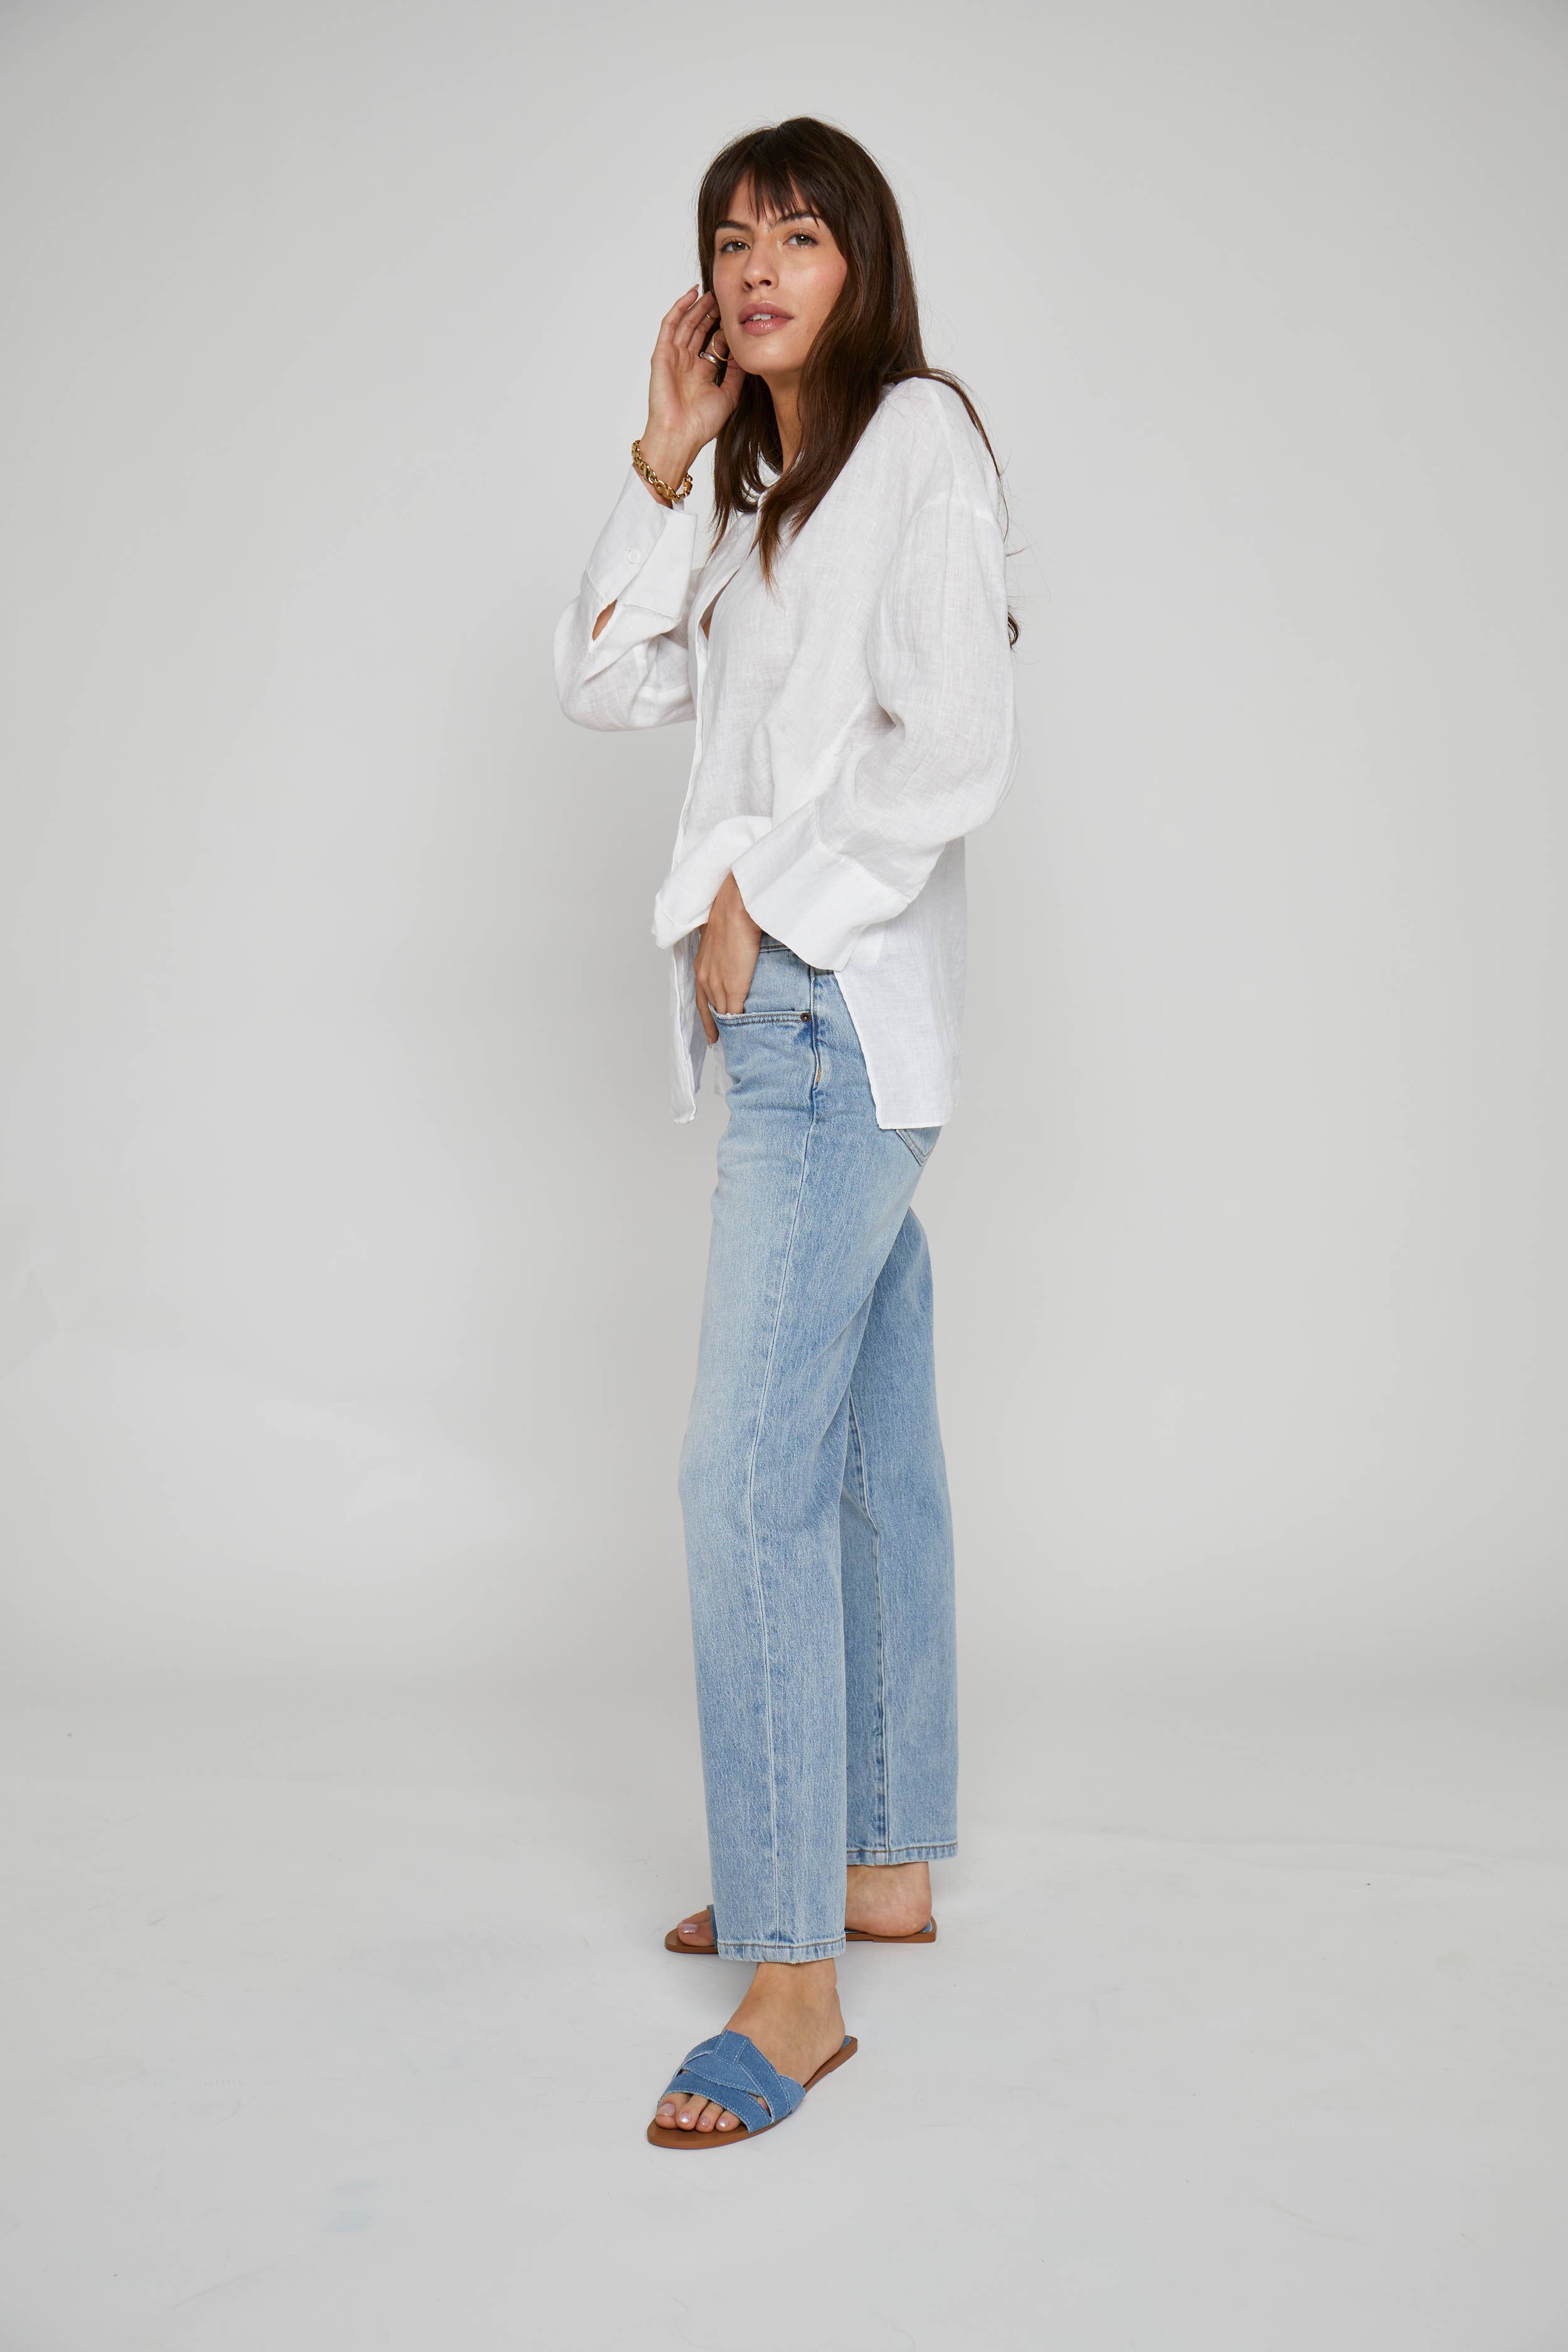 low rise light wash ankle length jeans